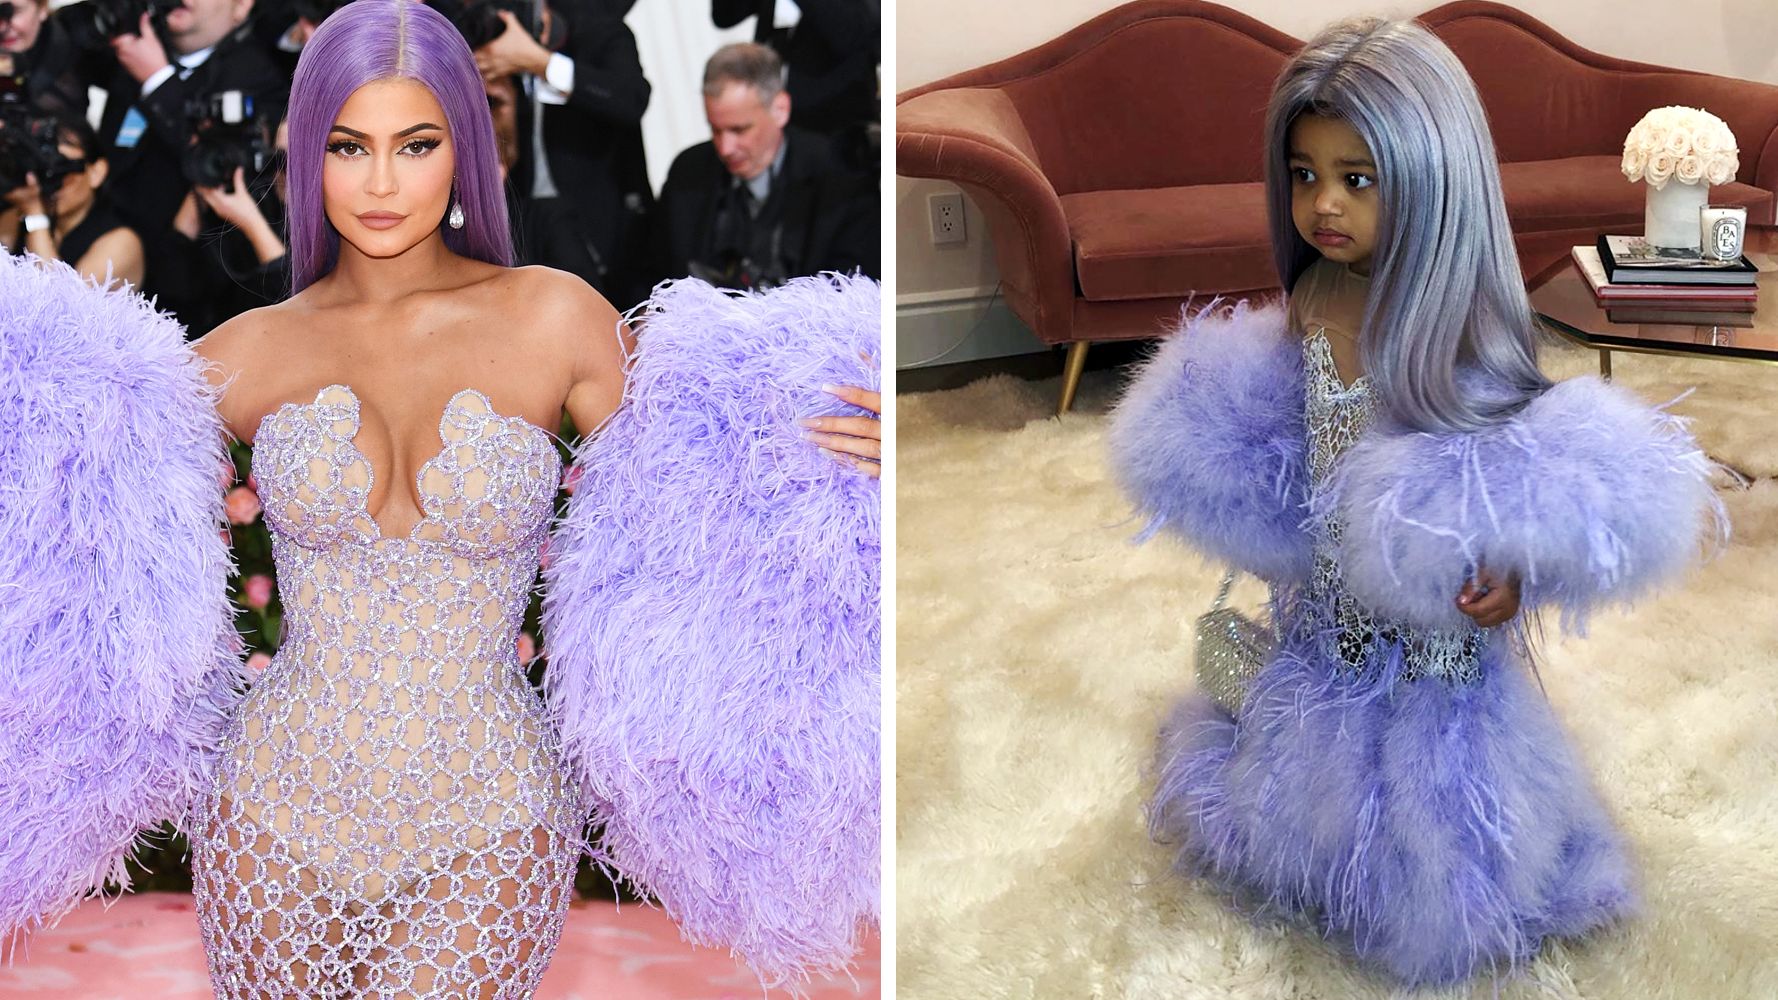 Kylie Jenner Wants What Done to Her Versace Gown?!